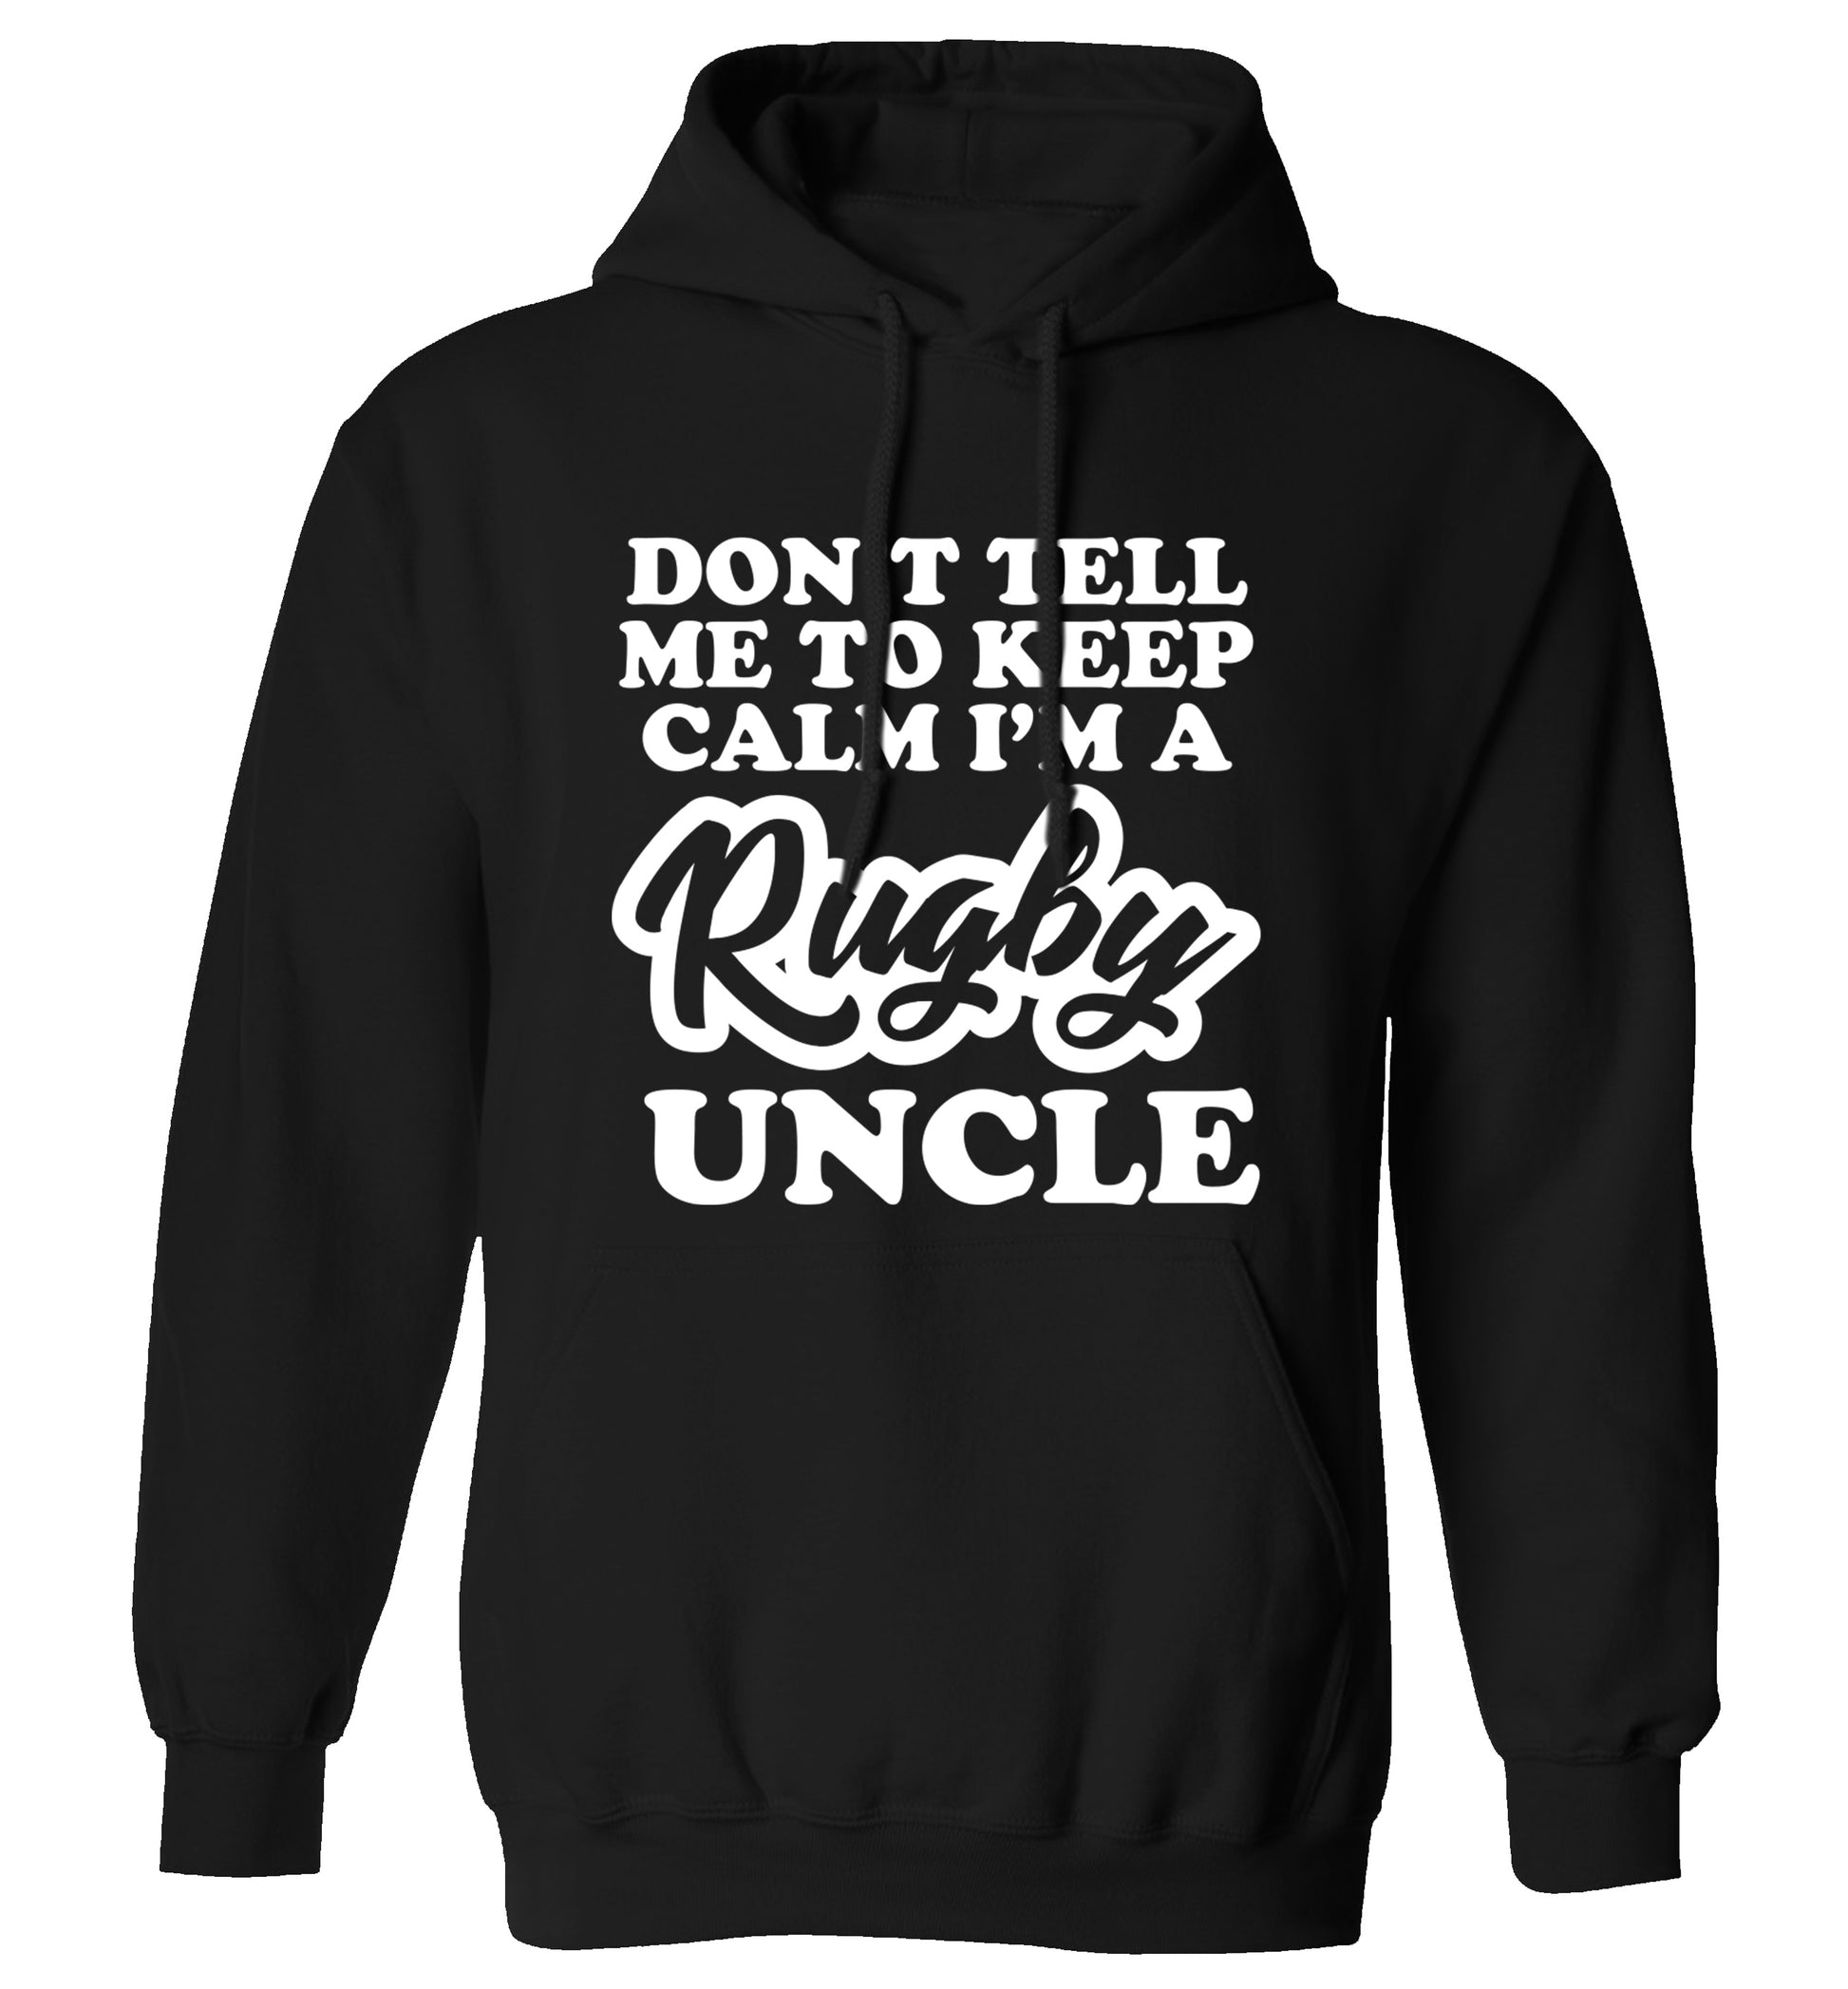 Don't tell me to keep calm I'm a rugby uncle adults unisex black hoodie 2XL